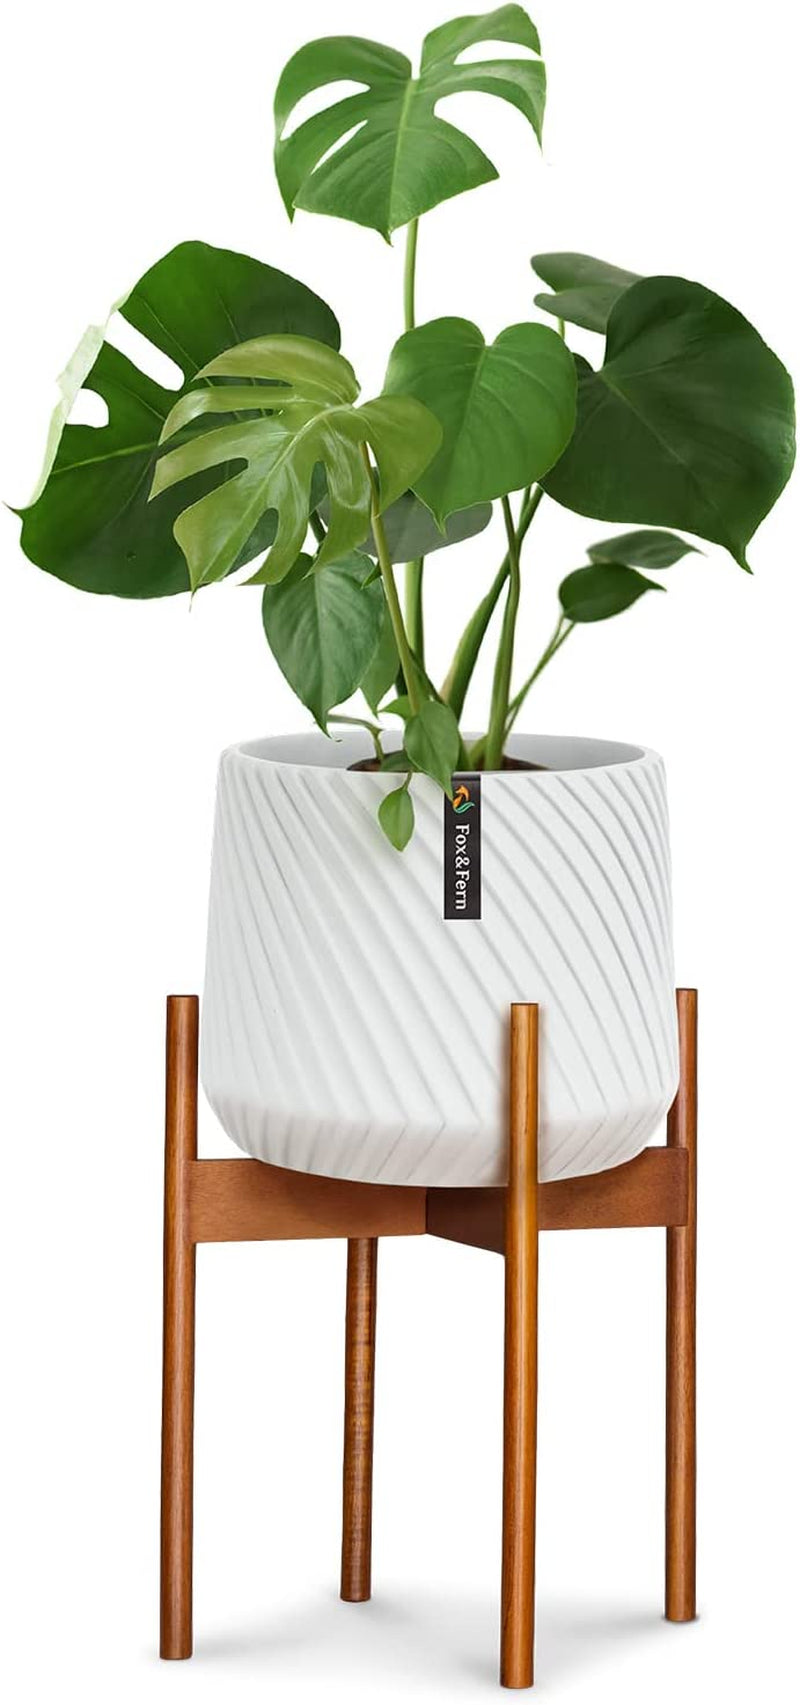 Fox & Fern Mid Century Modern Plant Stand, Plant Stand Indoor, Indoor Plant Stand, Plant Stands for Indoor Plants, Plant Holder, Corner Plant Stand - excluding Plant Pot - Acacia Wood - Fits 10" Pot Sporting Goods > Outdoor Recreation > Fishing > Fishing Rods Fox & Fern Acacia Fits 12" Pot 